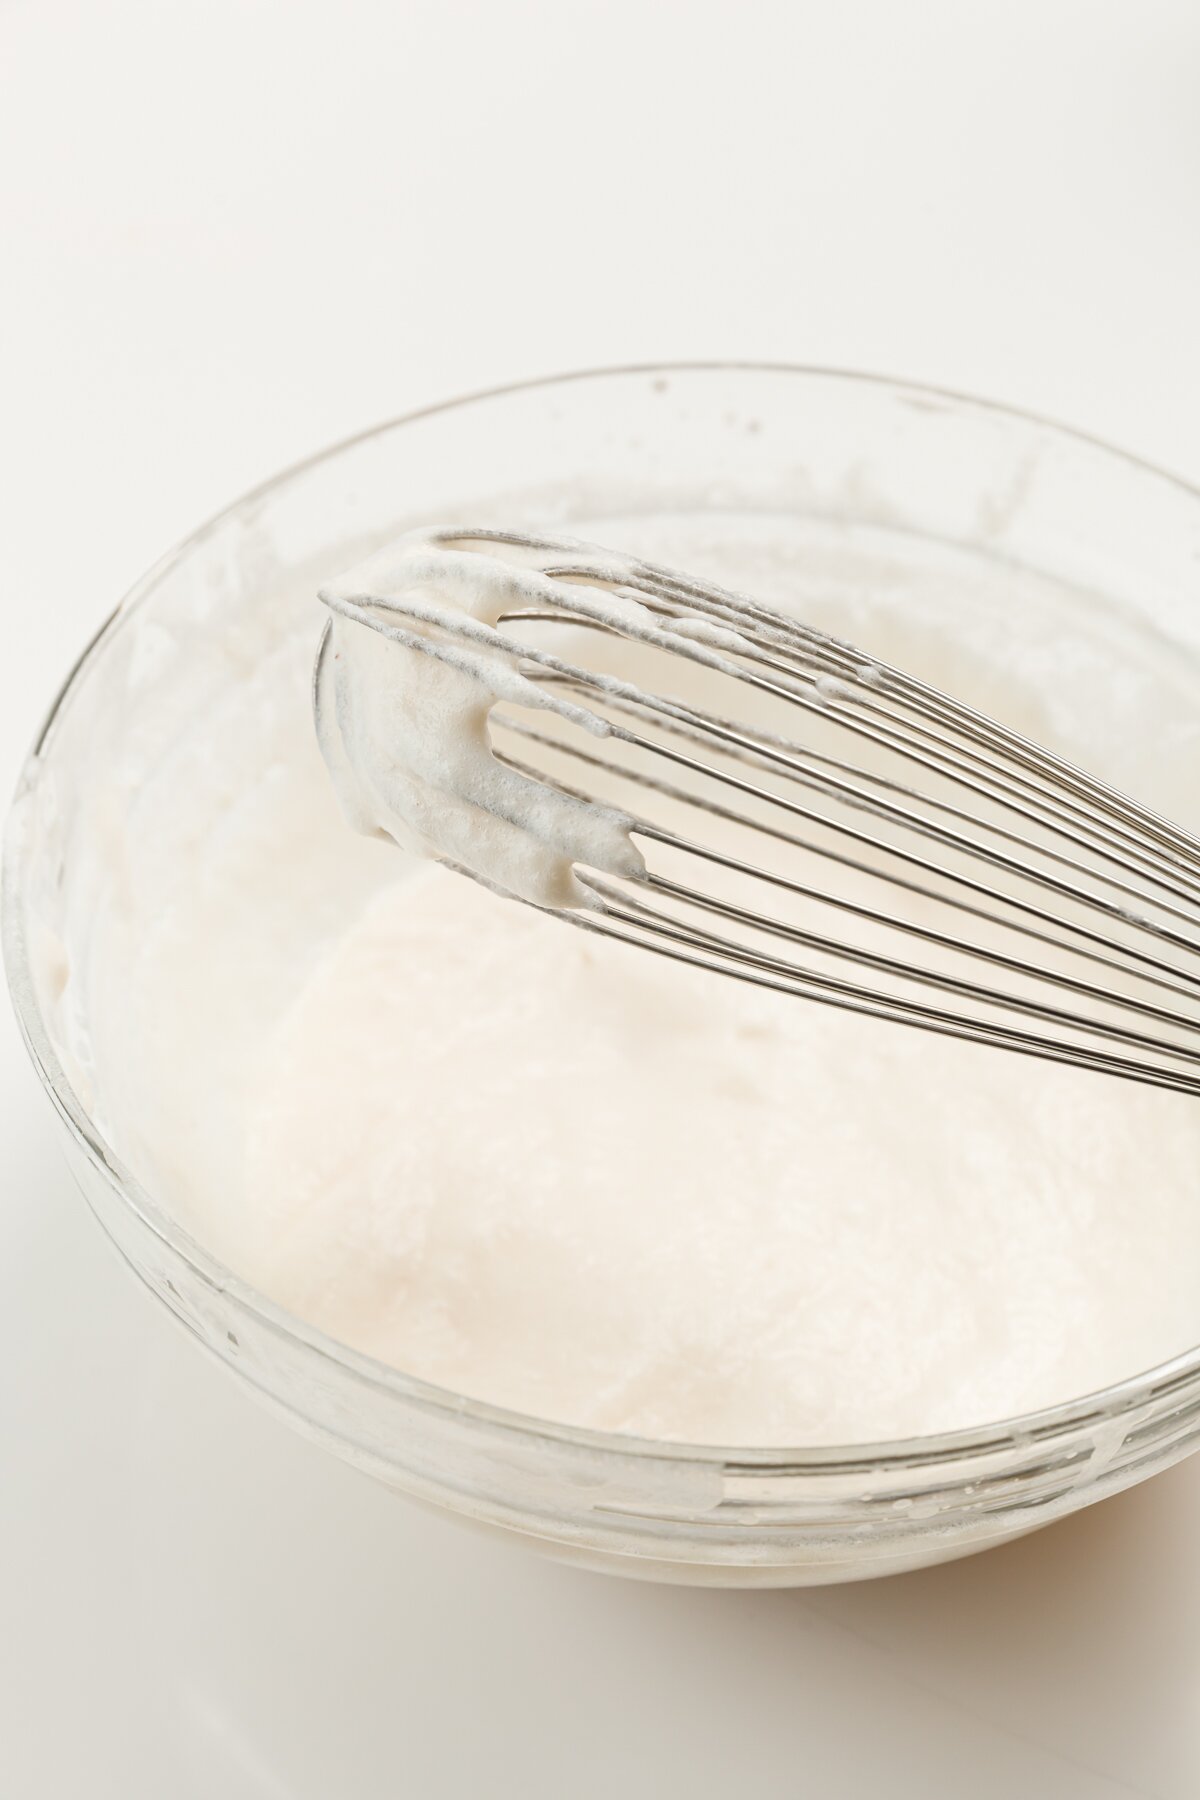 a whisk coated in froth from making a syllabub